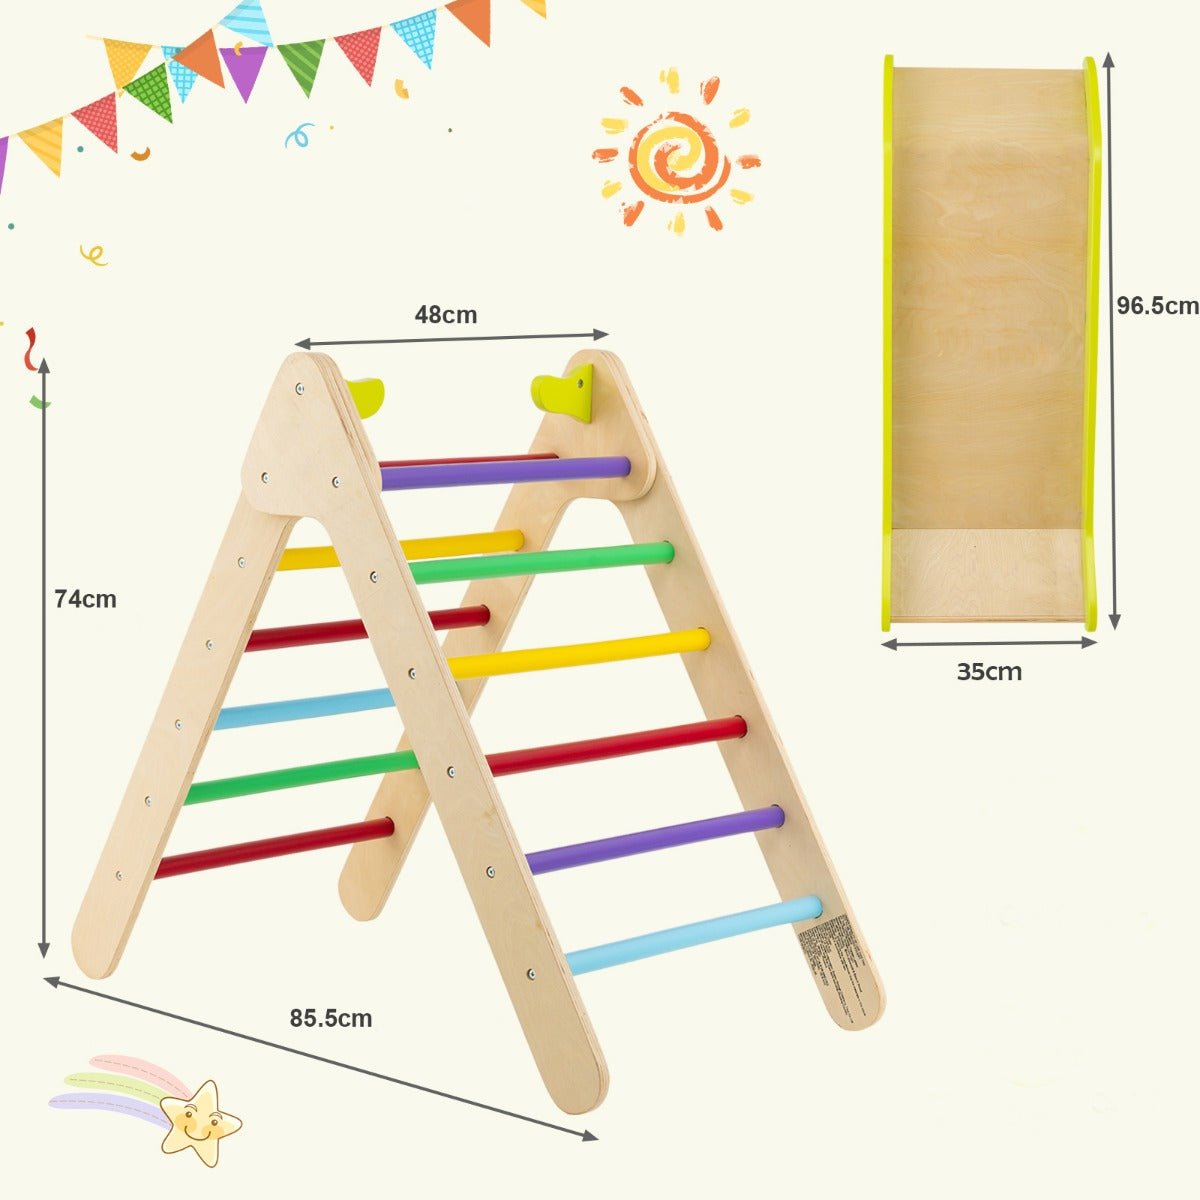 2-in-1 Kids Climbing Triangle - Slide into Active Outdoor Play